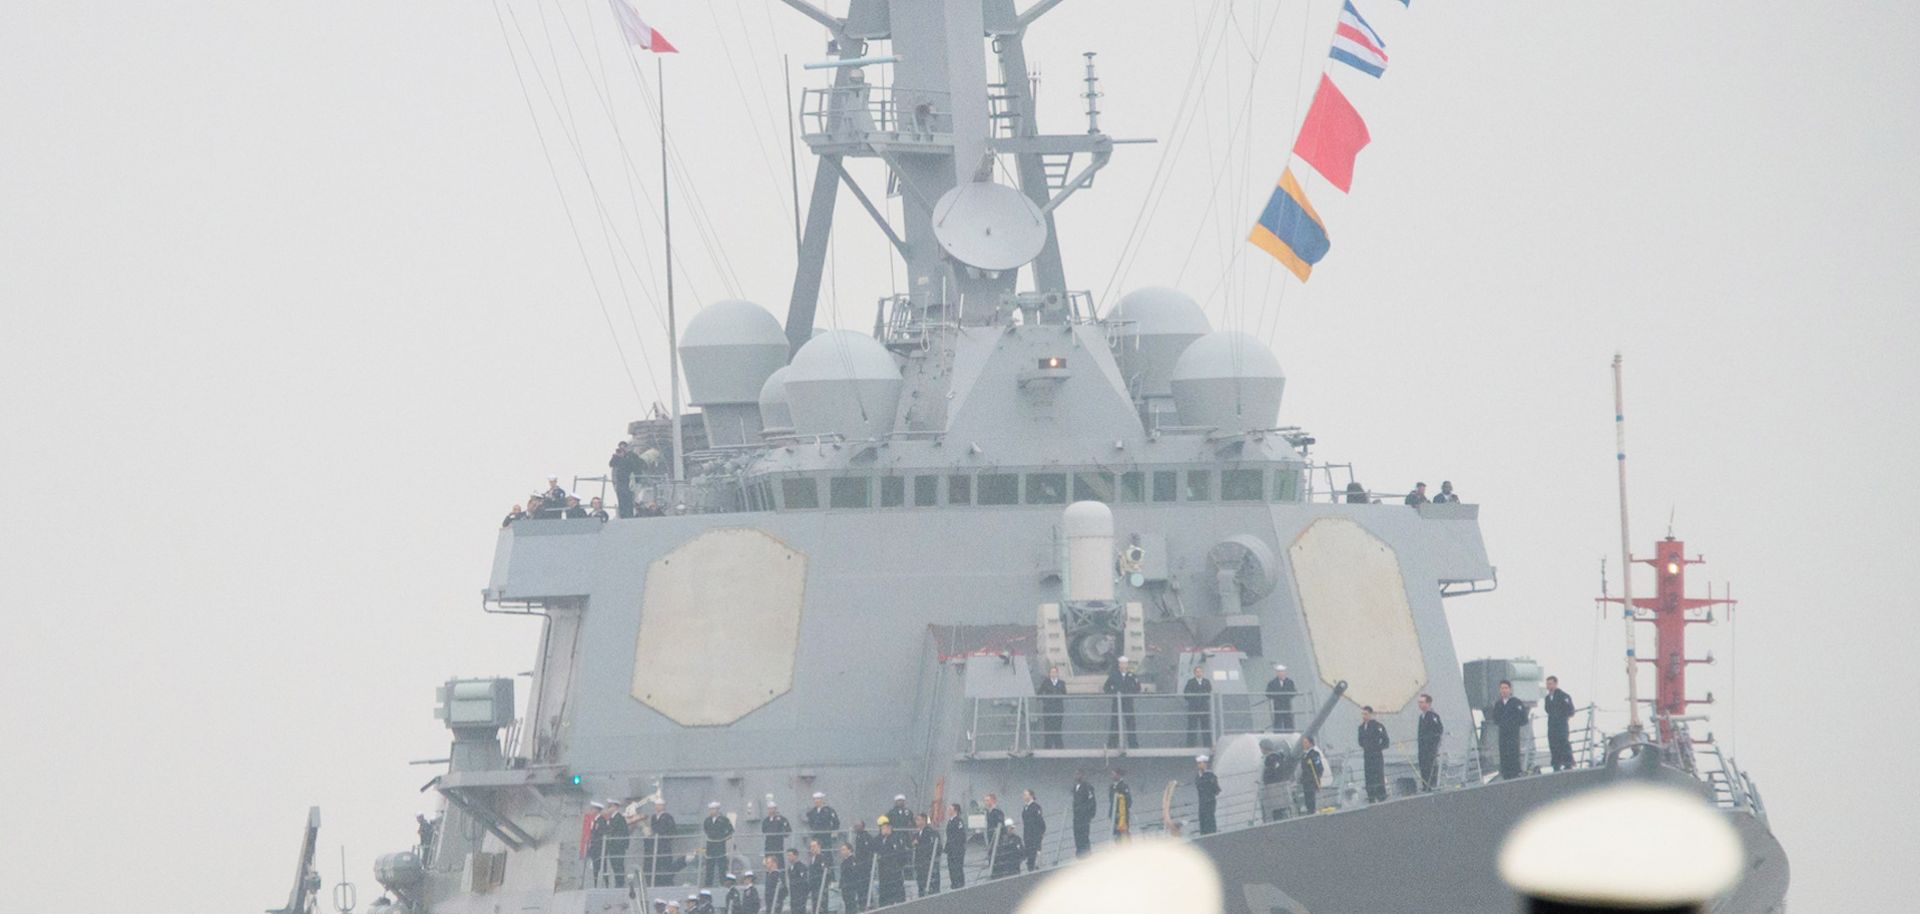 The guided missile destroyer USS Stethem (DDG 63) arrives at the Wusong military port in Shanghai on Nov. 16.